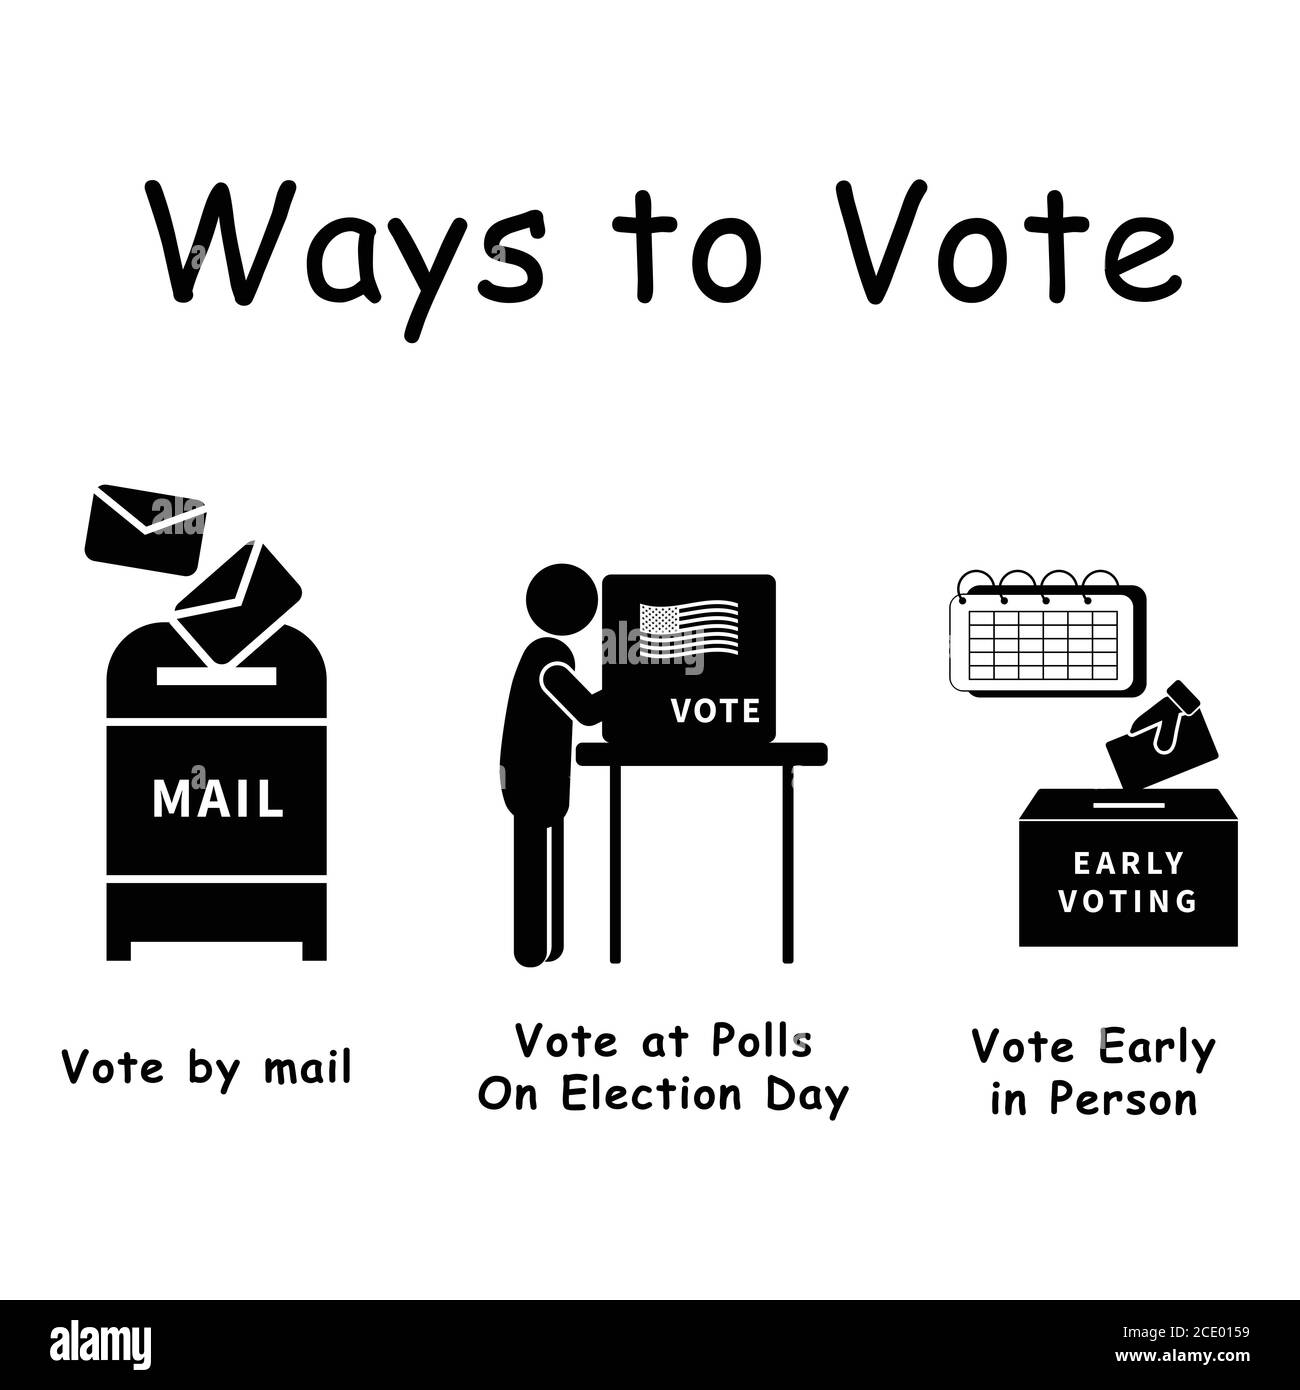 Three Ways to Vote, Pictogram depicting 3 ways voters can vote for election voting. By mail, in person at polls, early voting Black and white EPS Vect Stock Vector